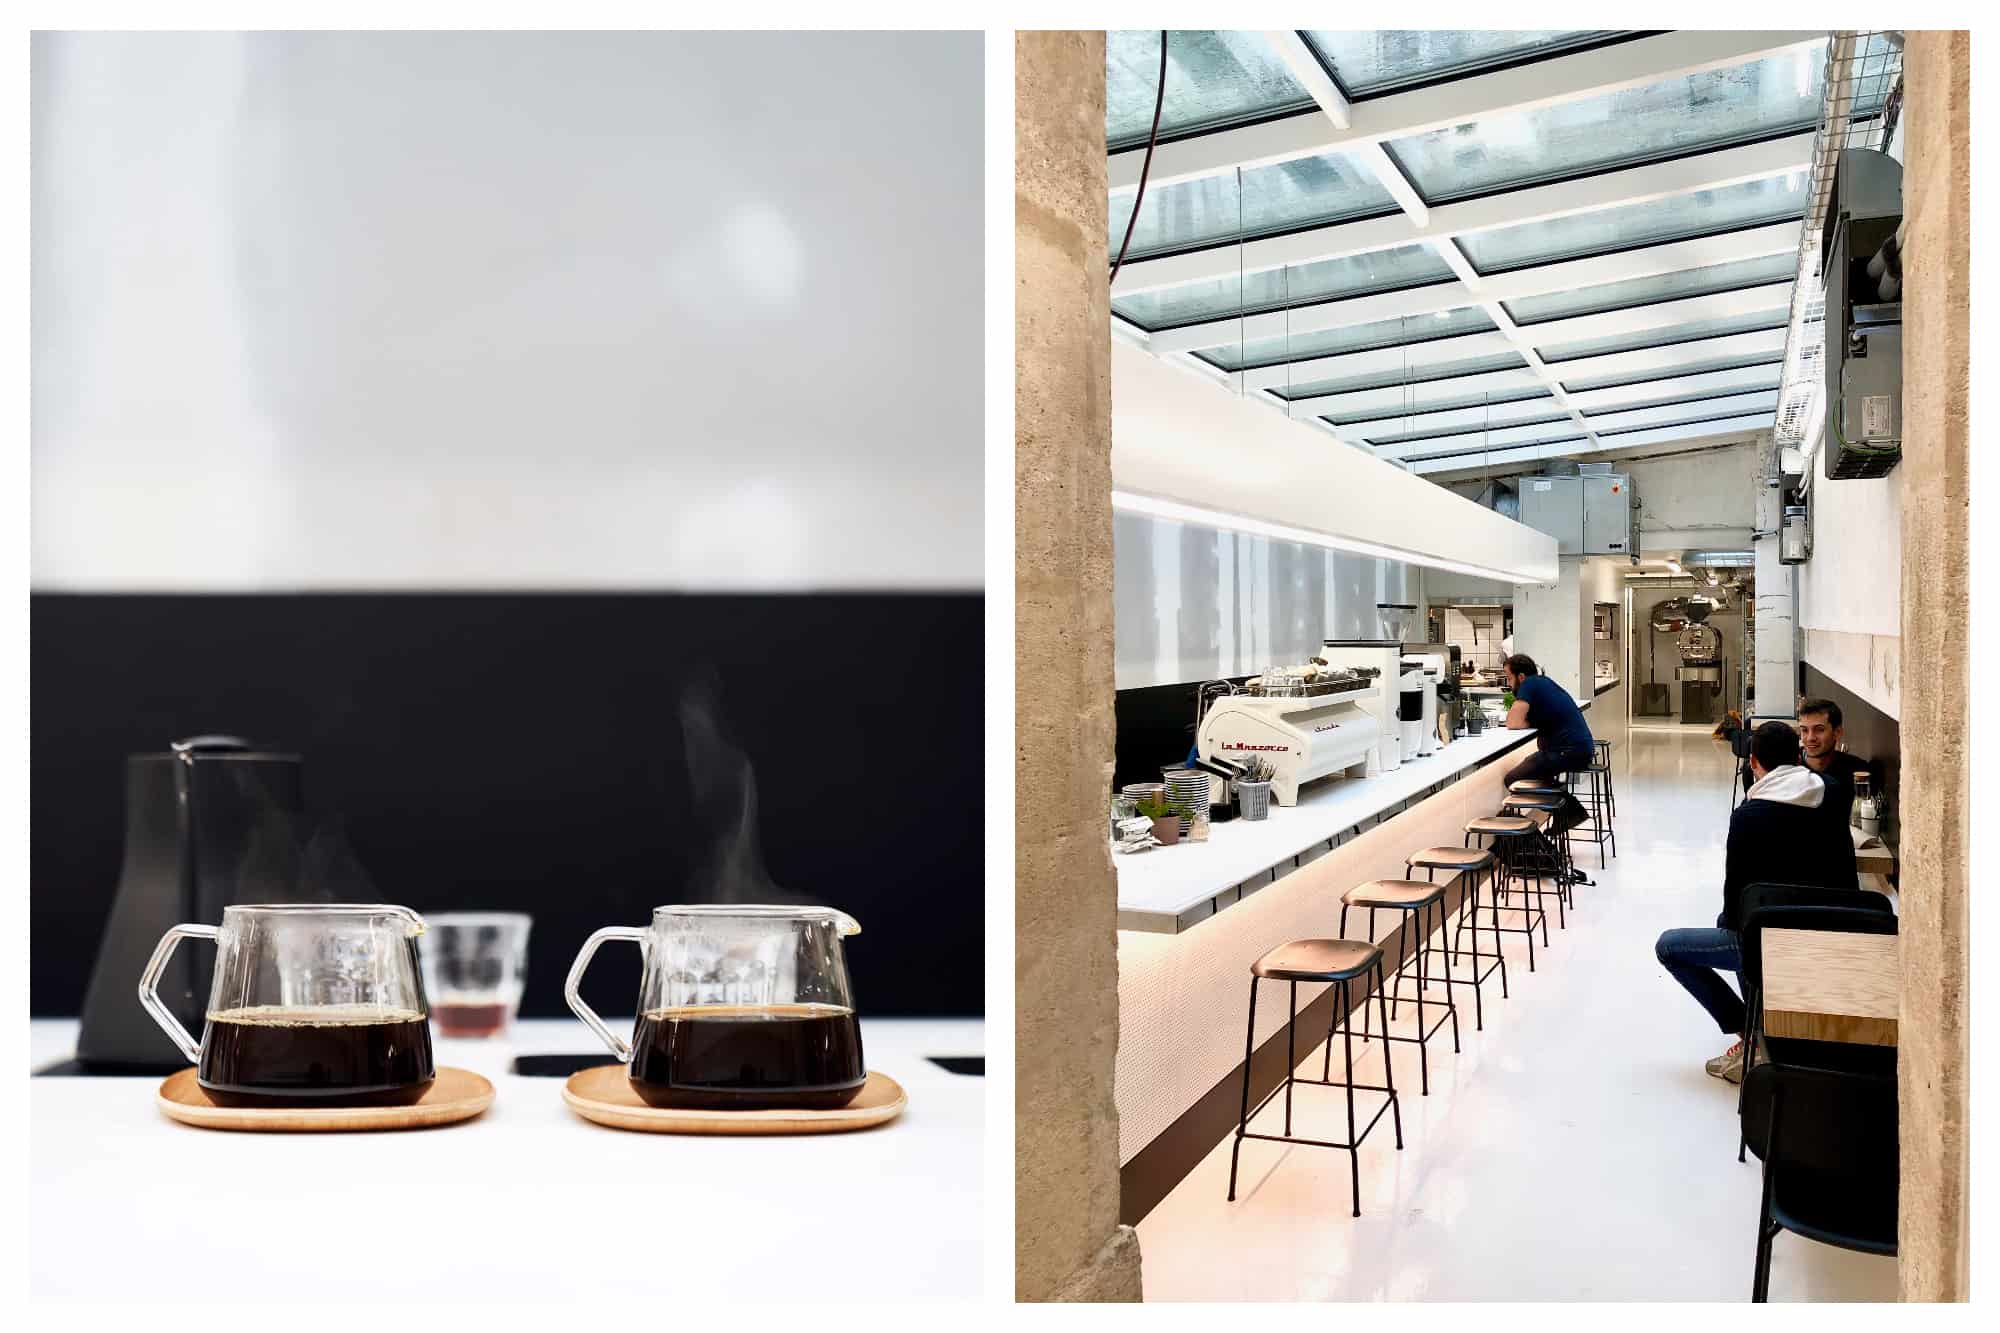 Two pots of glass steaming coffee pots (left) and zen interiors with glass roof (right) at Paris café Back in Black.